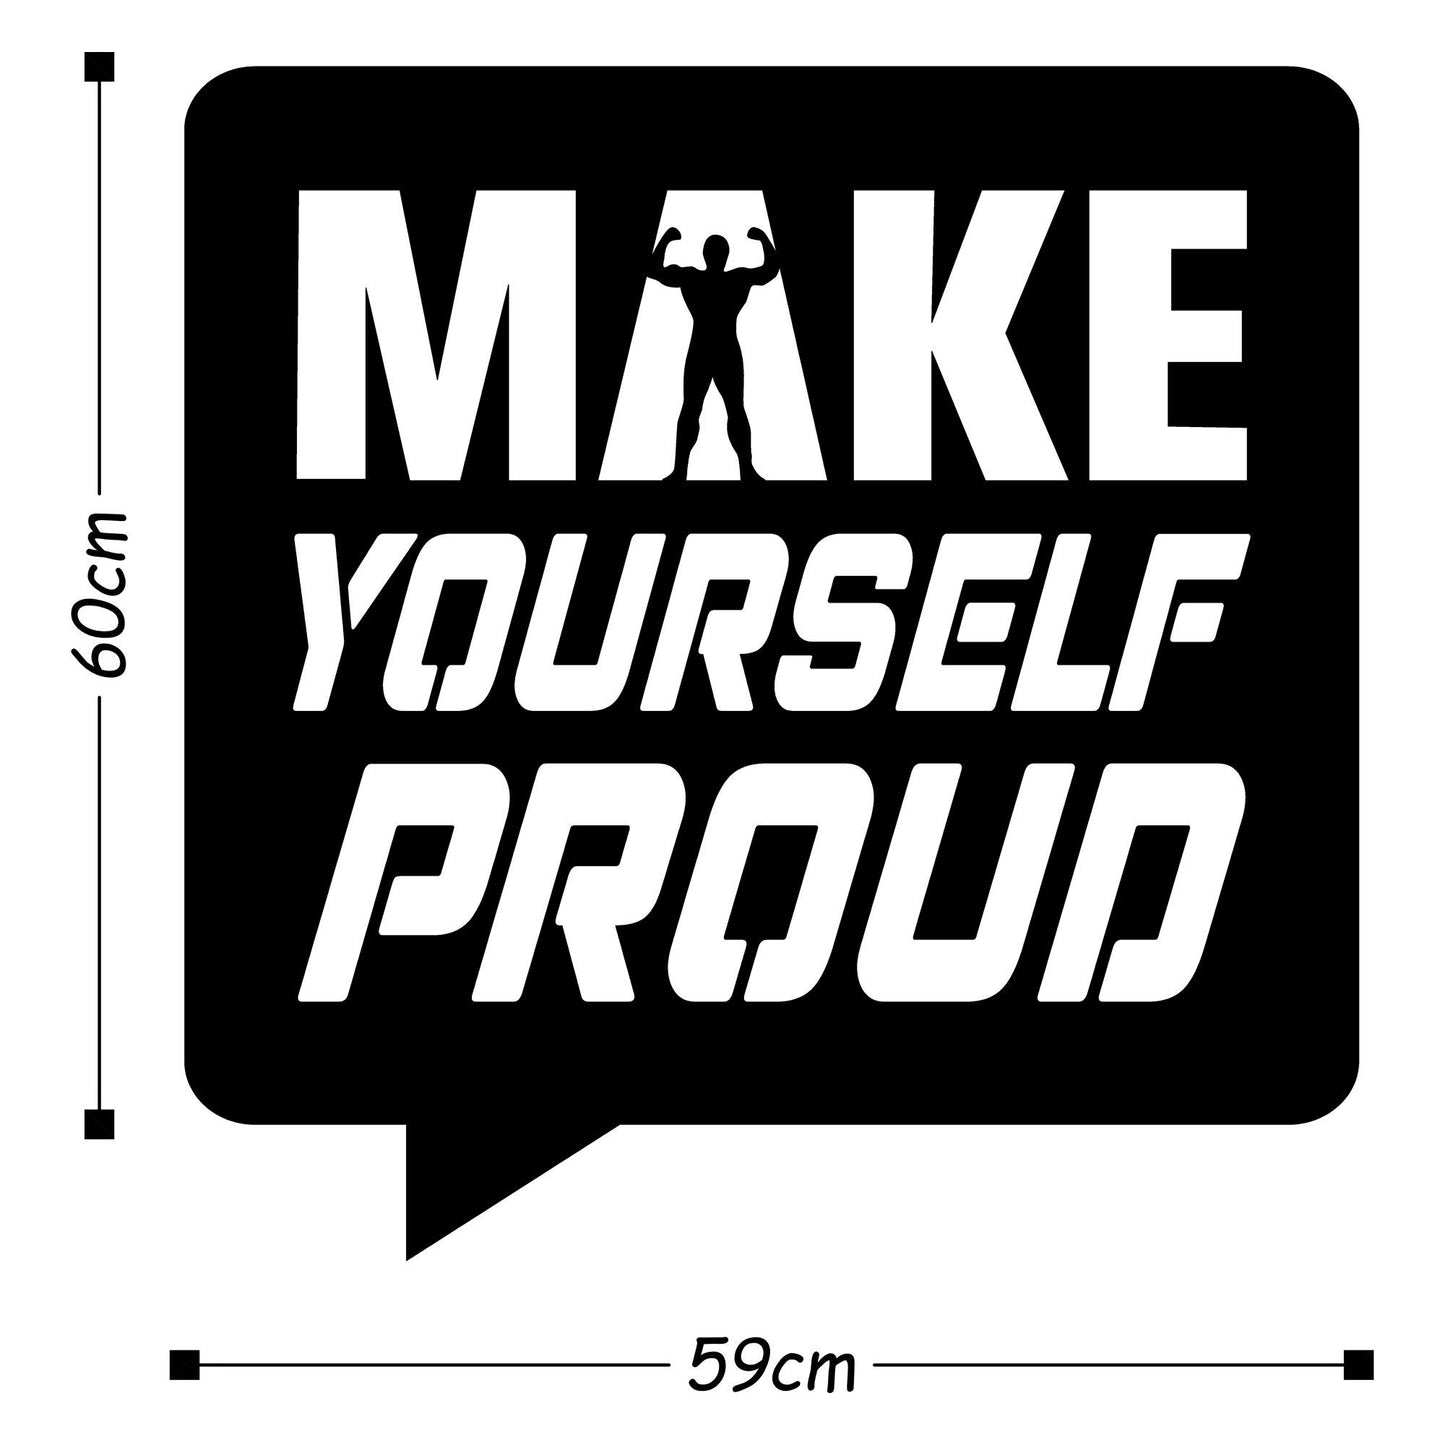 Make Yourself Proud - Decorative Metal Wall Accessory